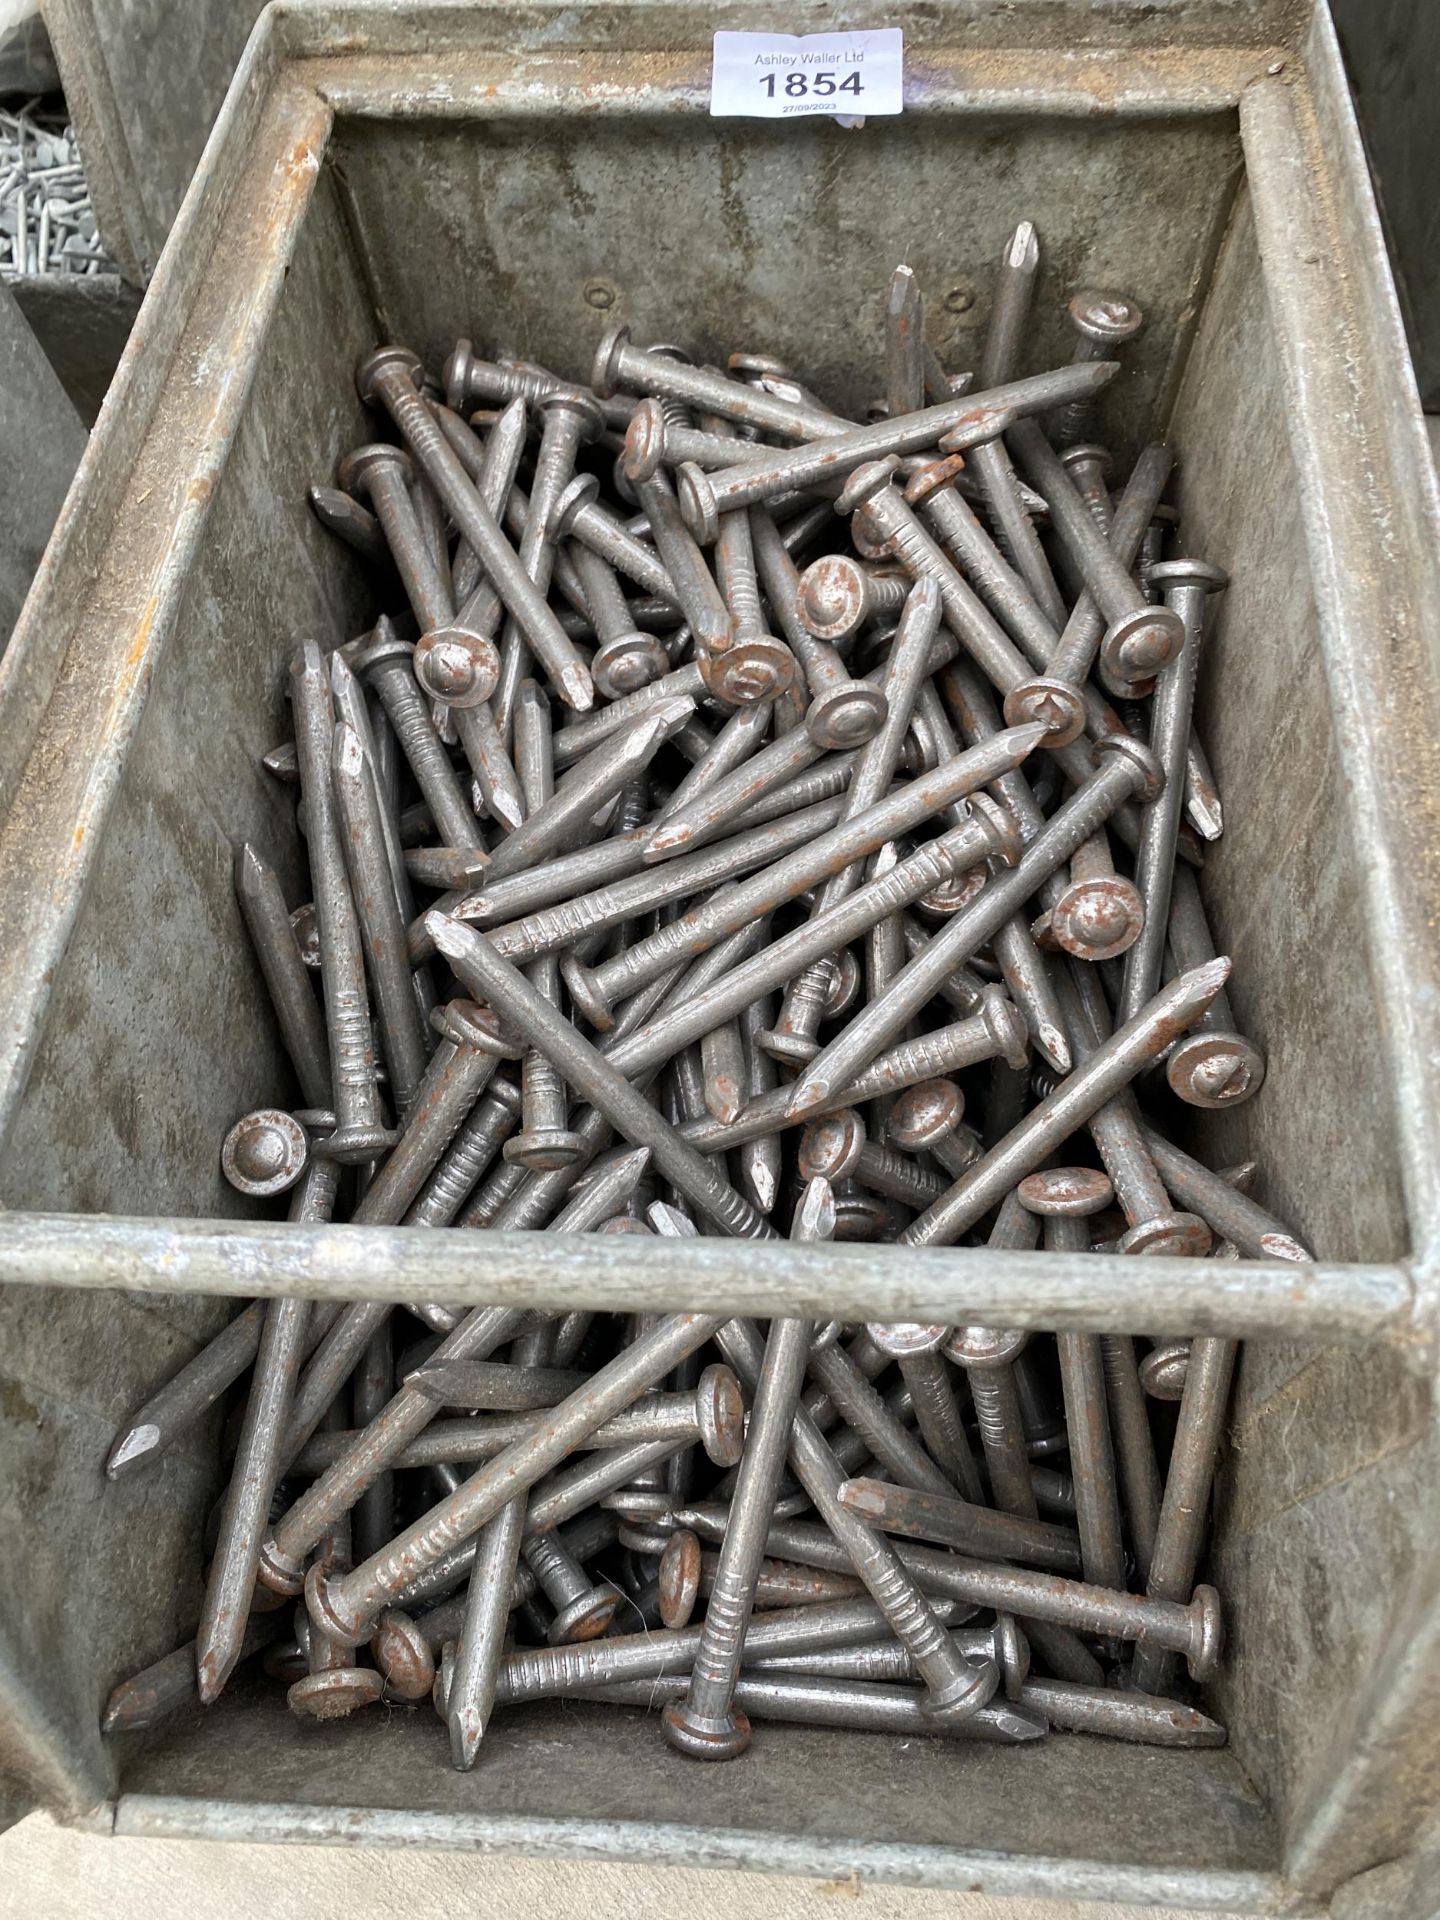 A LARGE ASSORTMENT OF NAILS AND FENCING STAPLES - Image 3 of 4